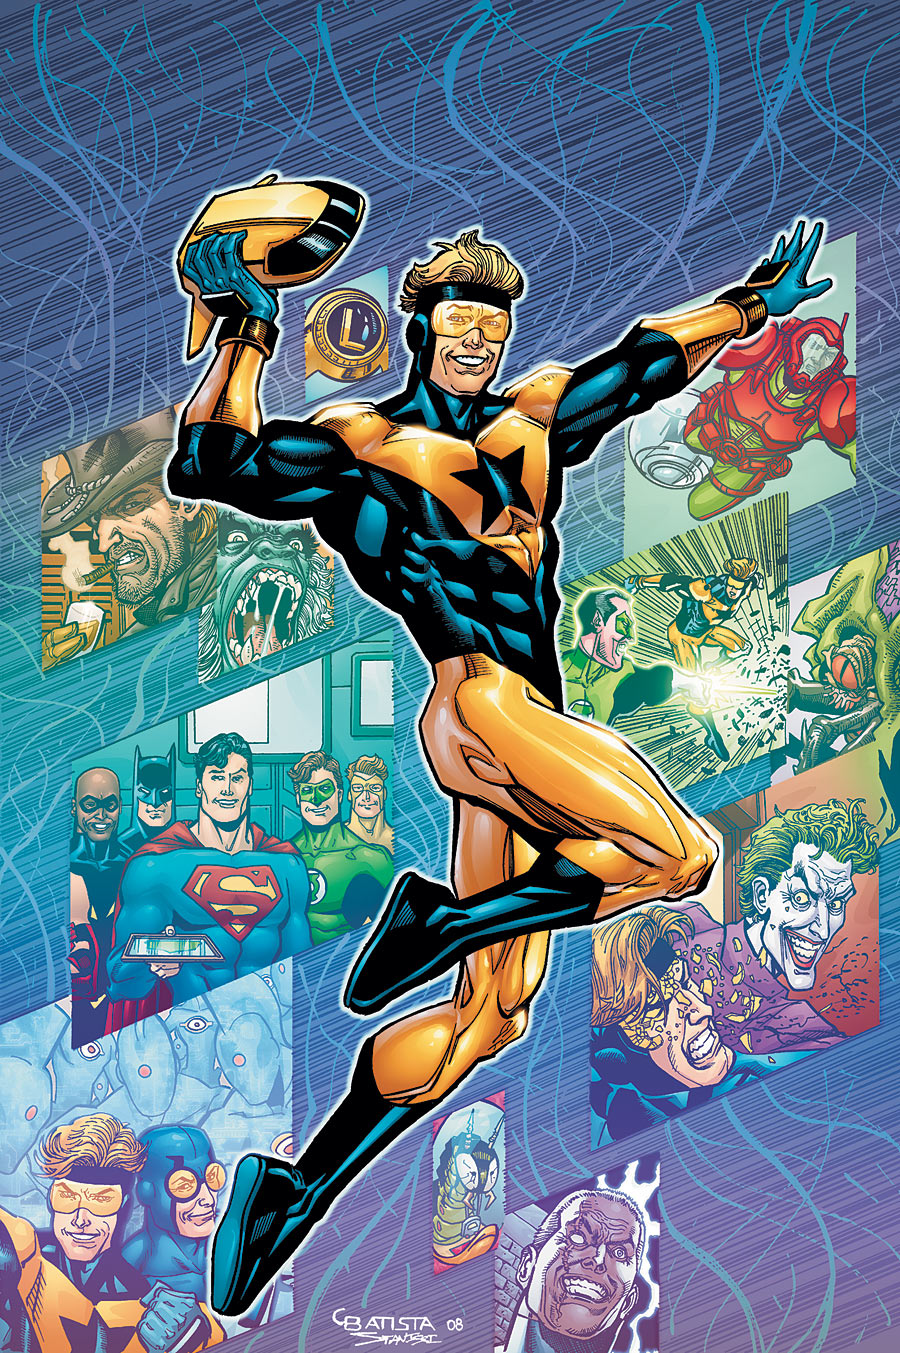 http://images1.wikia.nocookie.net/marvel_dc/images/d/dc/Booster_Gold_004.jpg